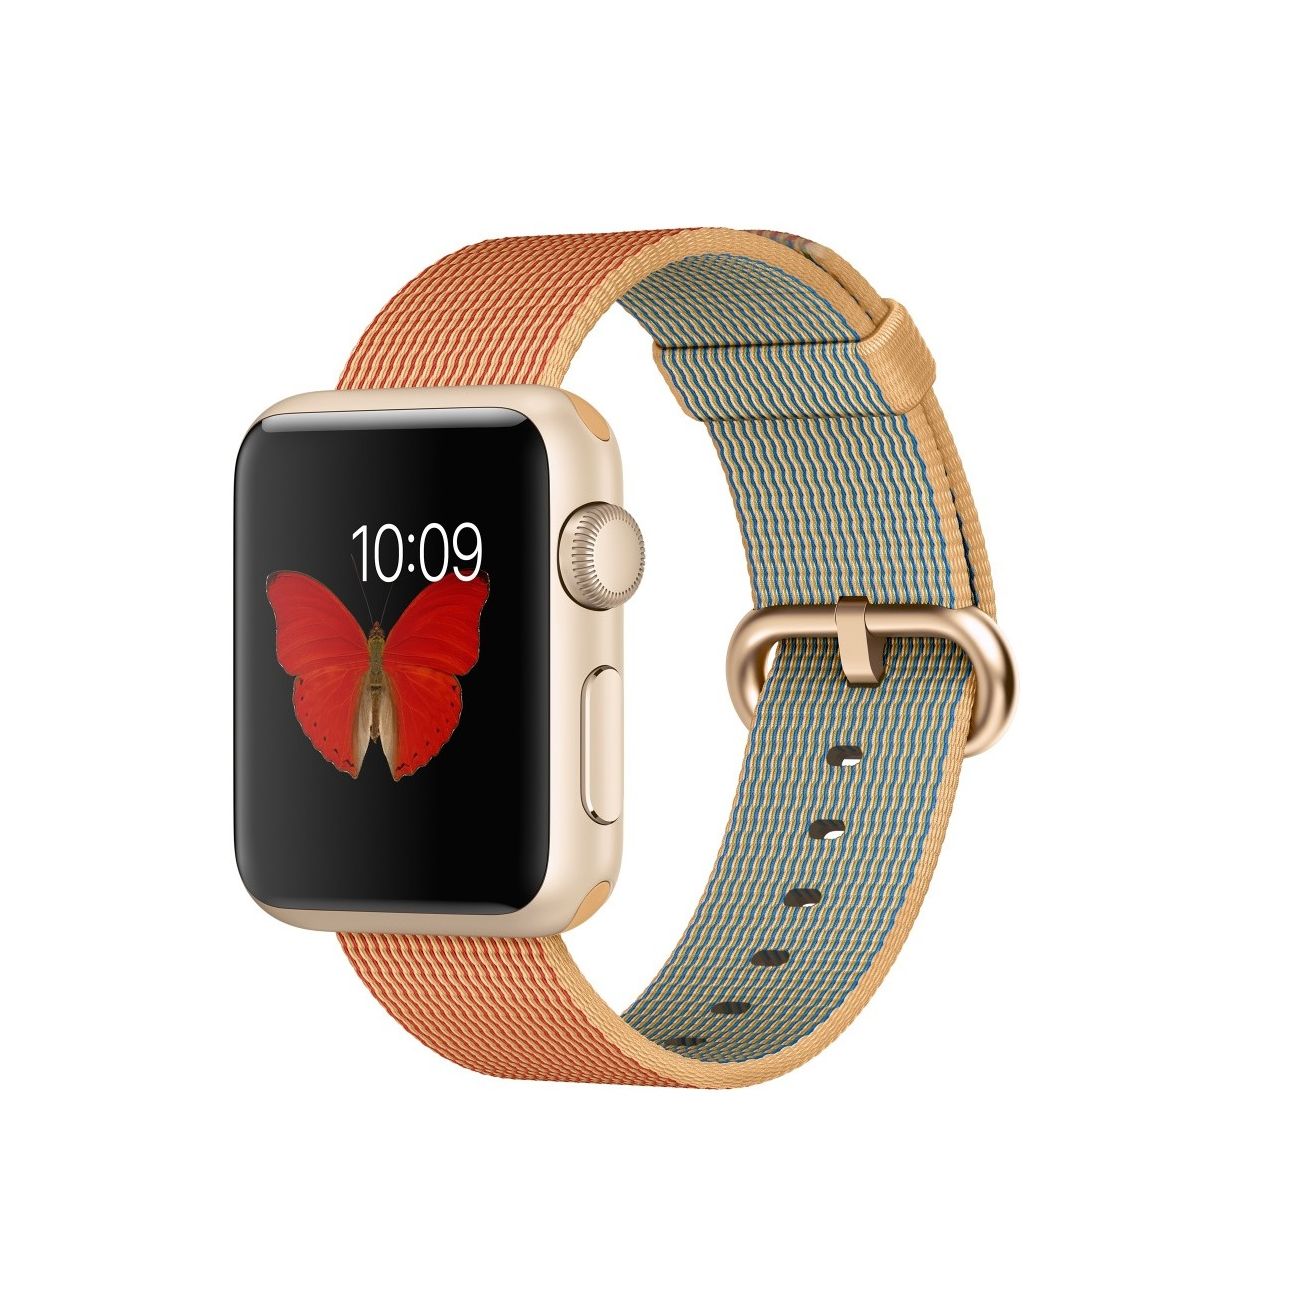 Apple Watch 38mm Gold Aluminium Case With Red Woven Nylon